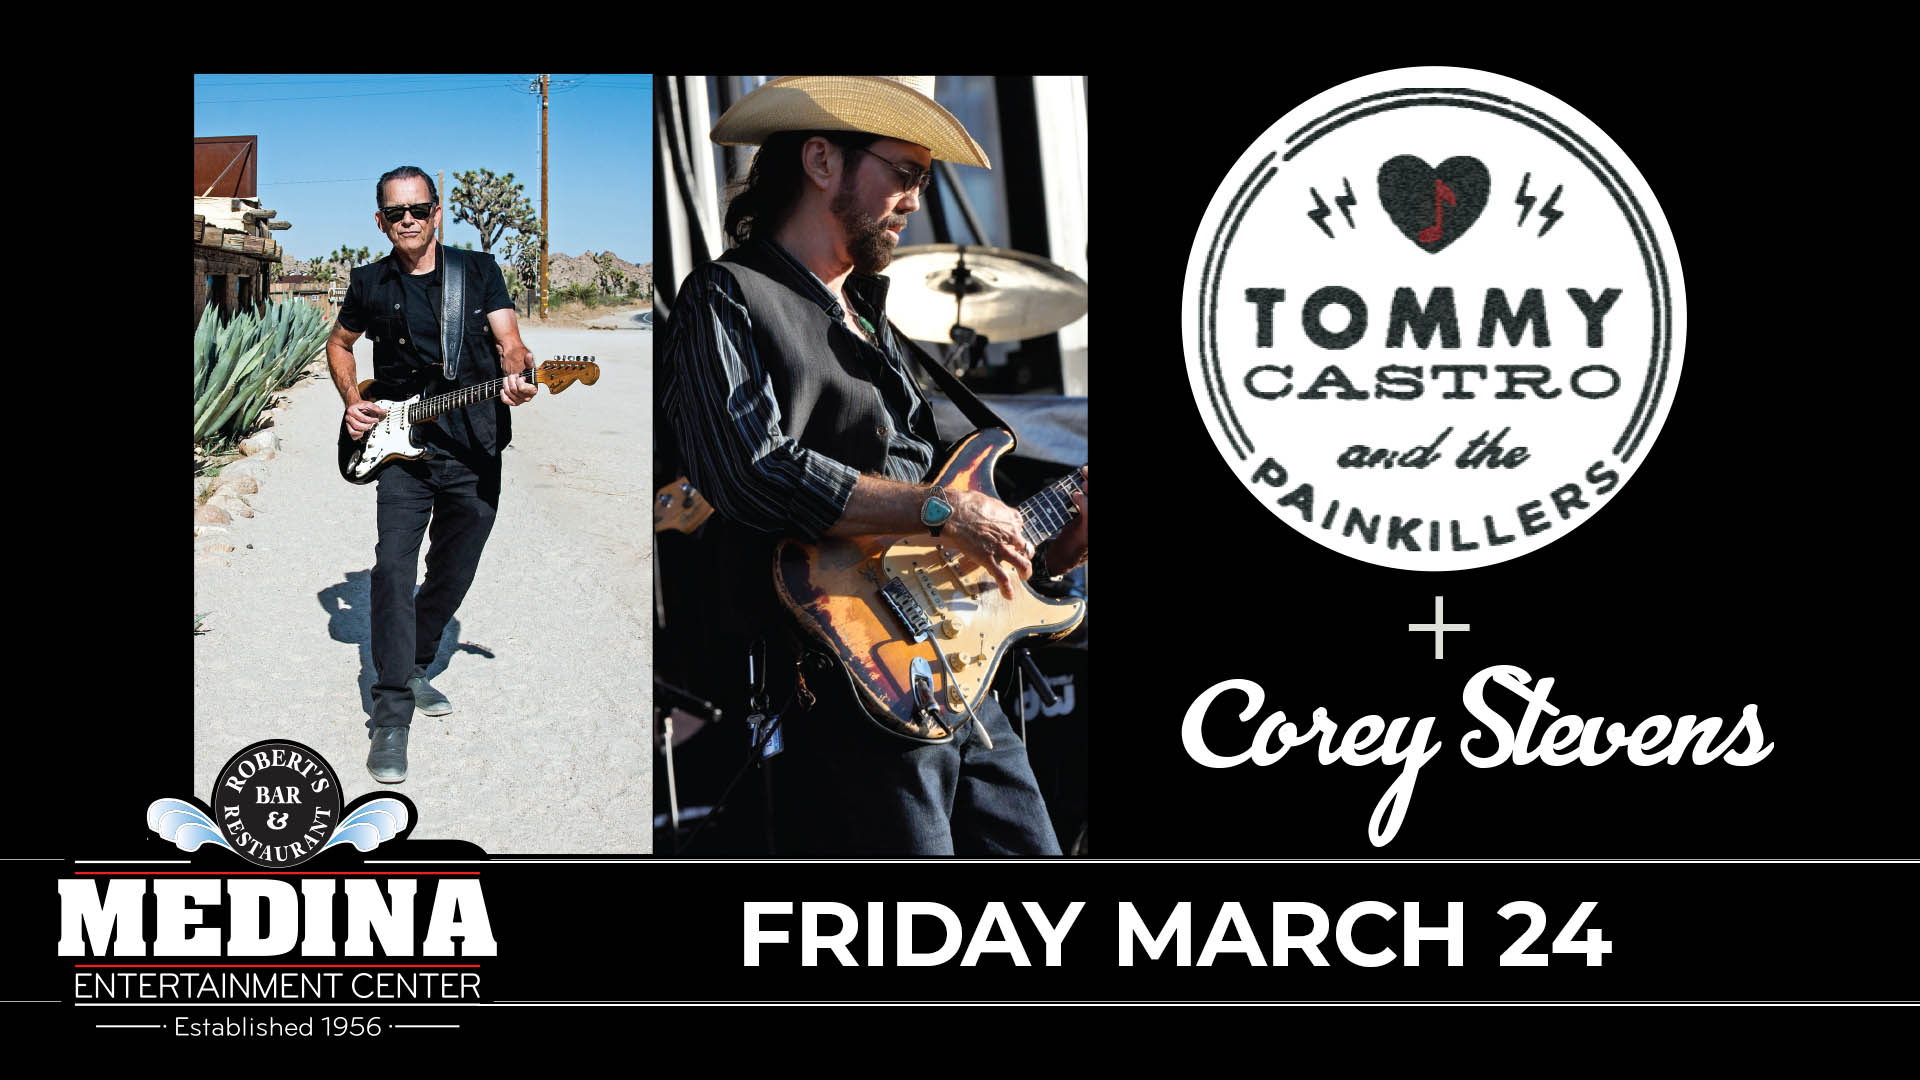 Tommy Castro & The Painkillers + Corey Stevens Medina Entertainment Center Friday, March 24th, 2023 Doors: 7:00PM | Music: 8:00PM | 21+ Ticket Prices: $38.00 (Gold Seating), $33.00 (Silver Seating) & $28.00 (GA Seating) plus applicable fees